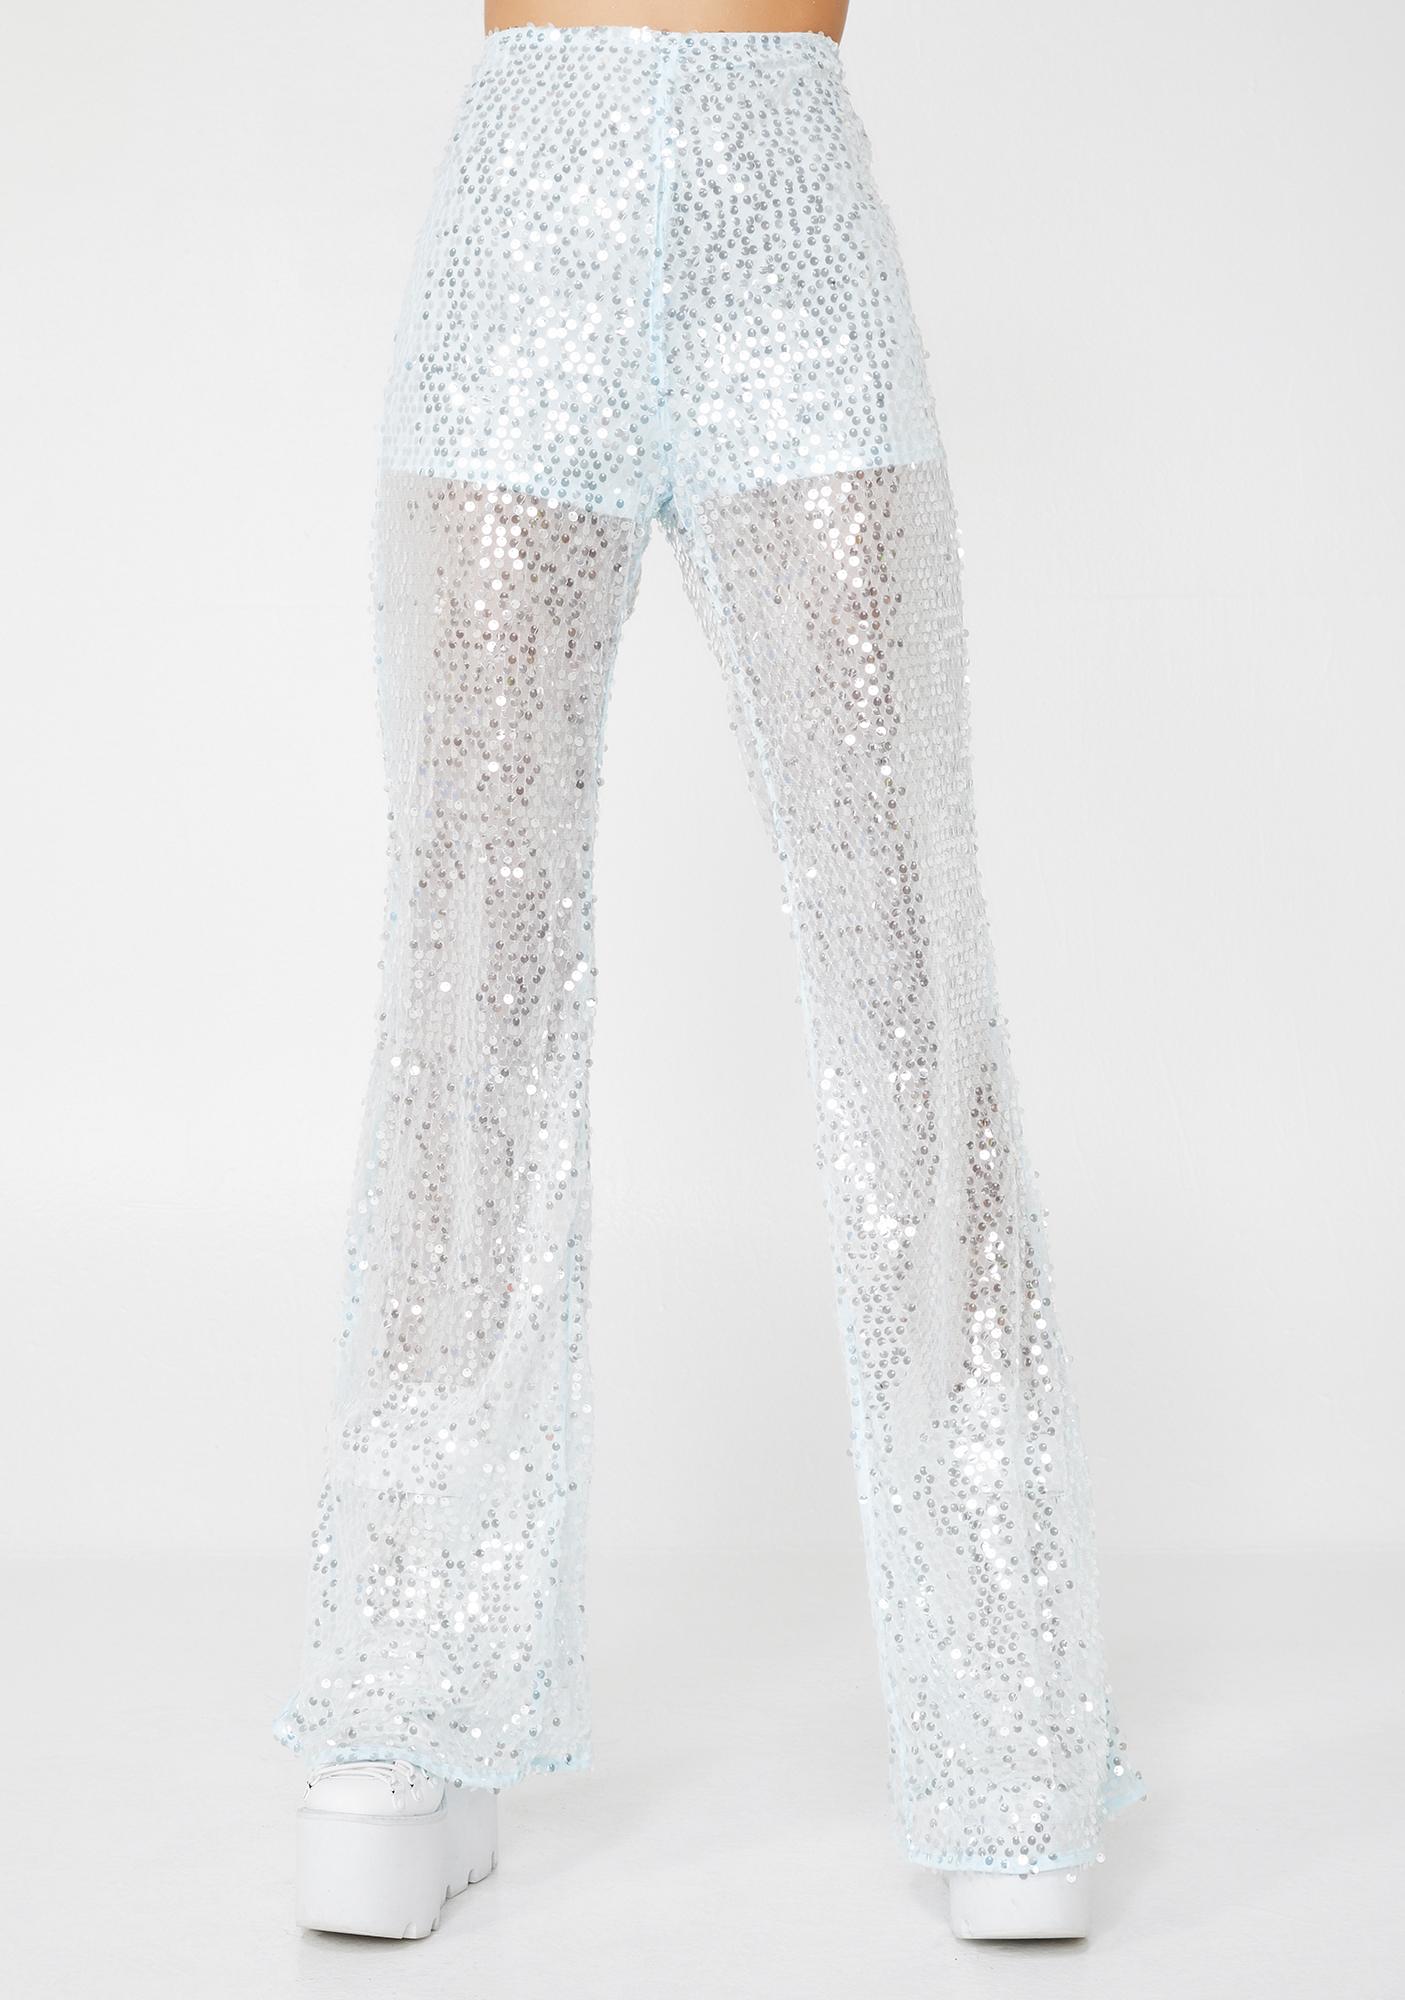 sparkly flared pants